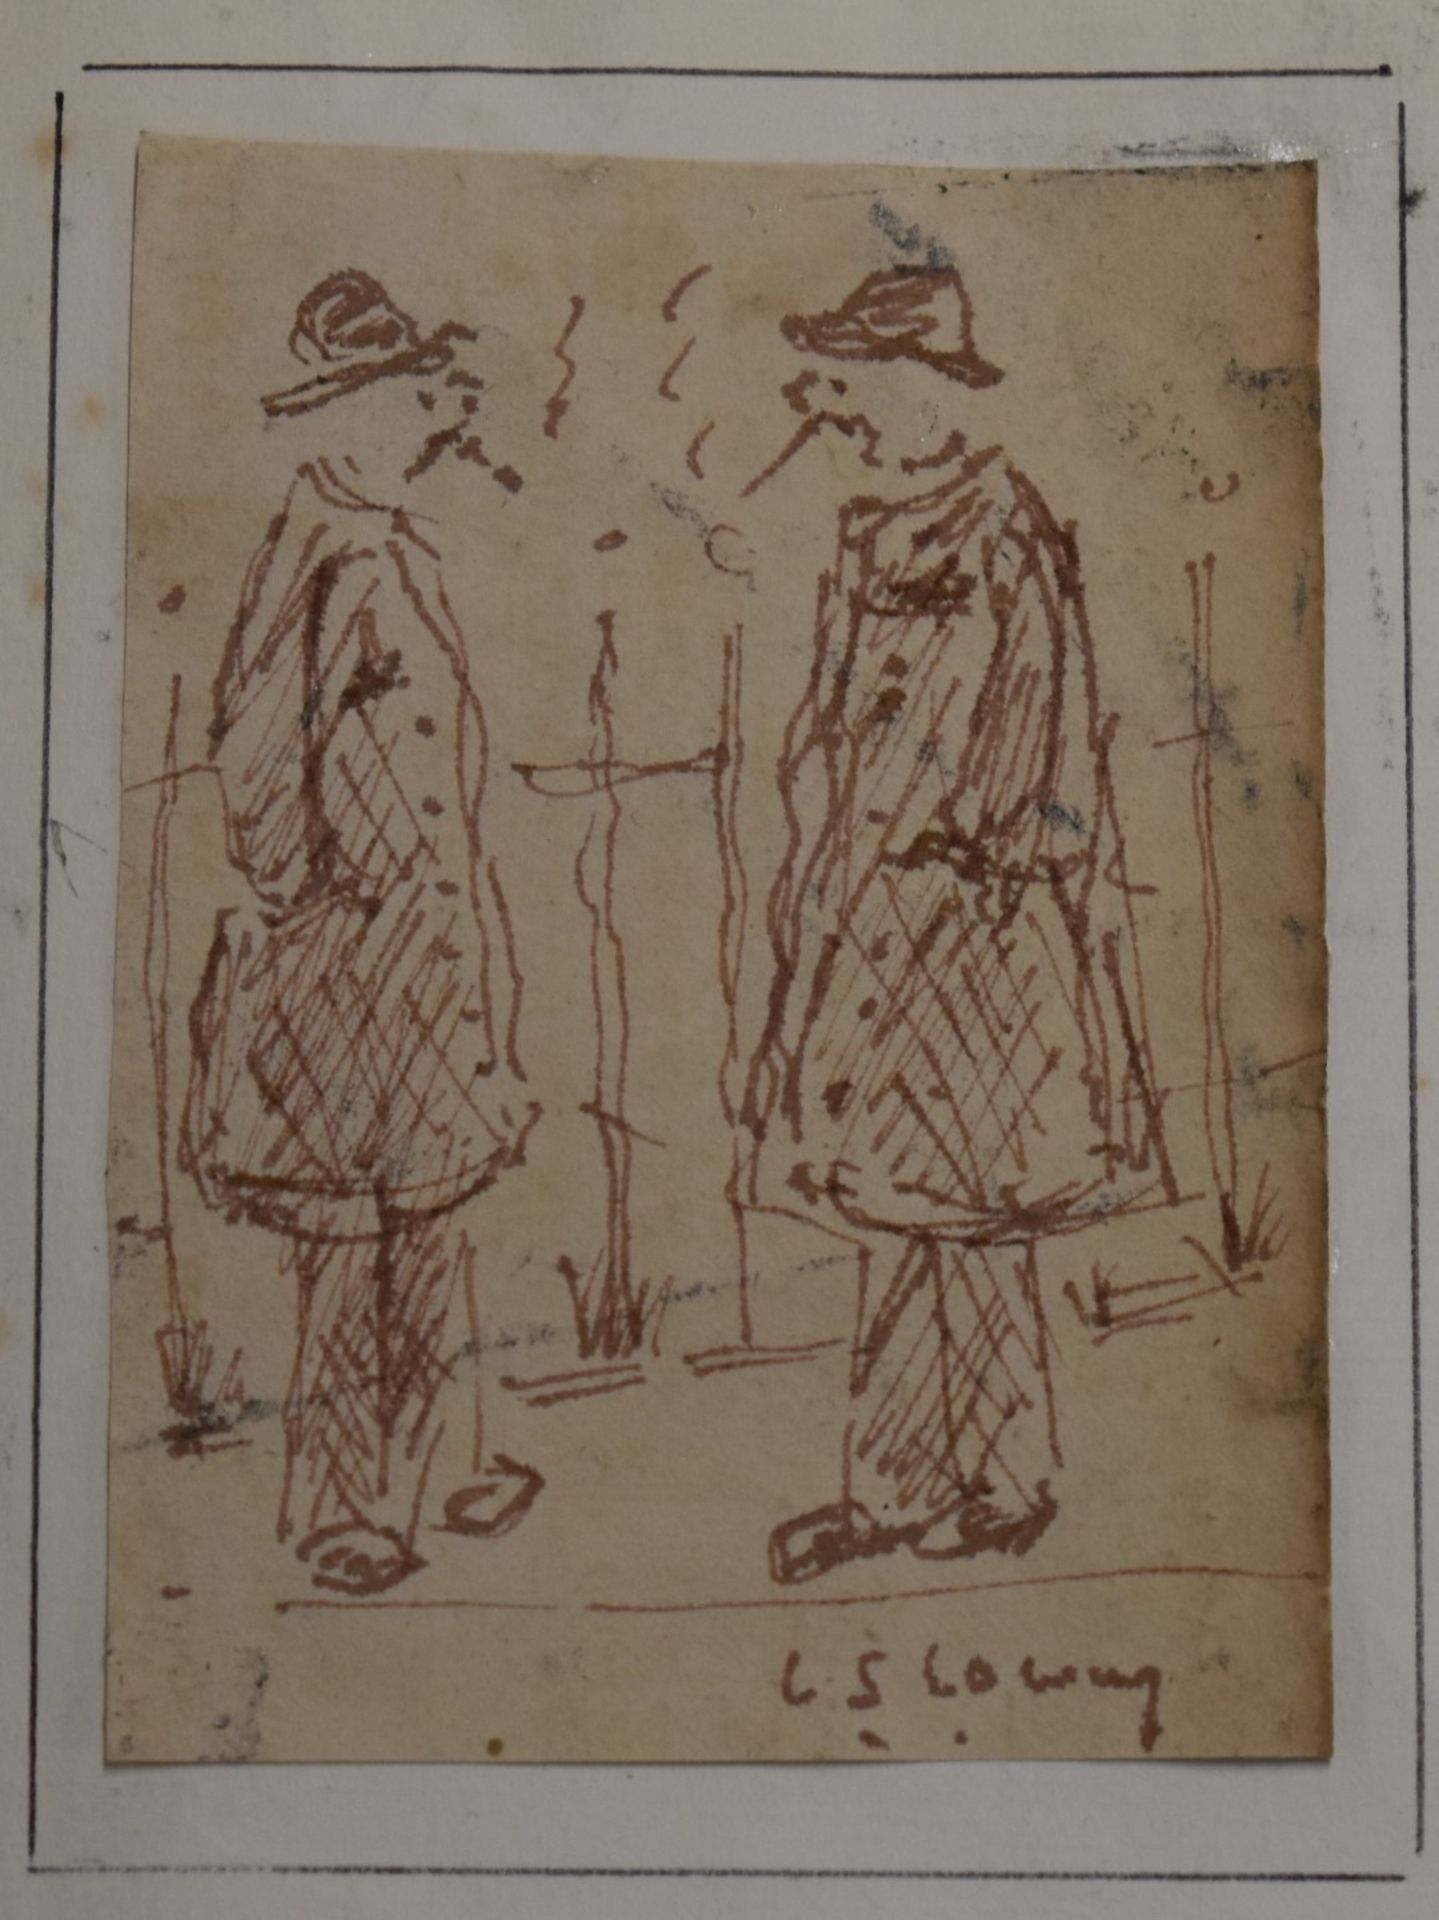 Laurence Stephen Lowry (1887-1976) pen and ink sketch two men smoking in front of railings, signed - Image 2 of 5